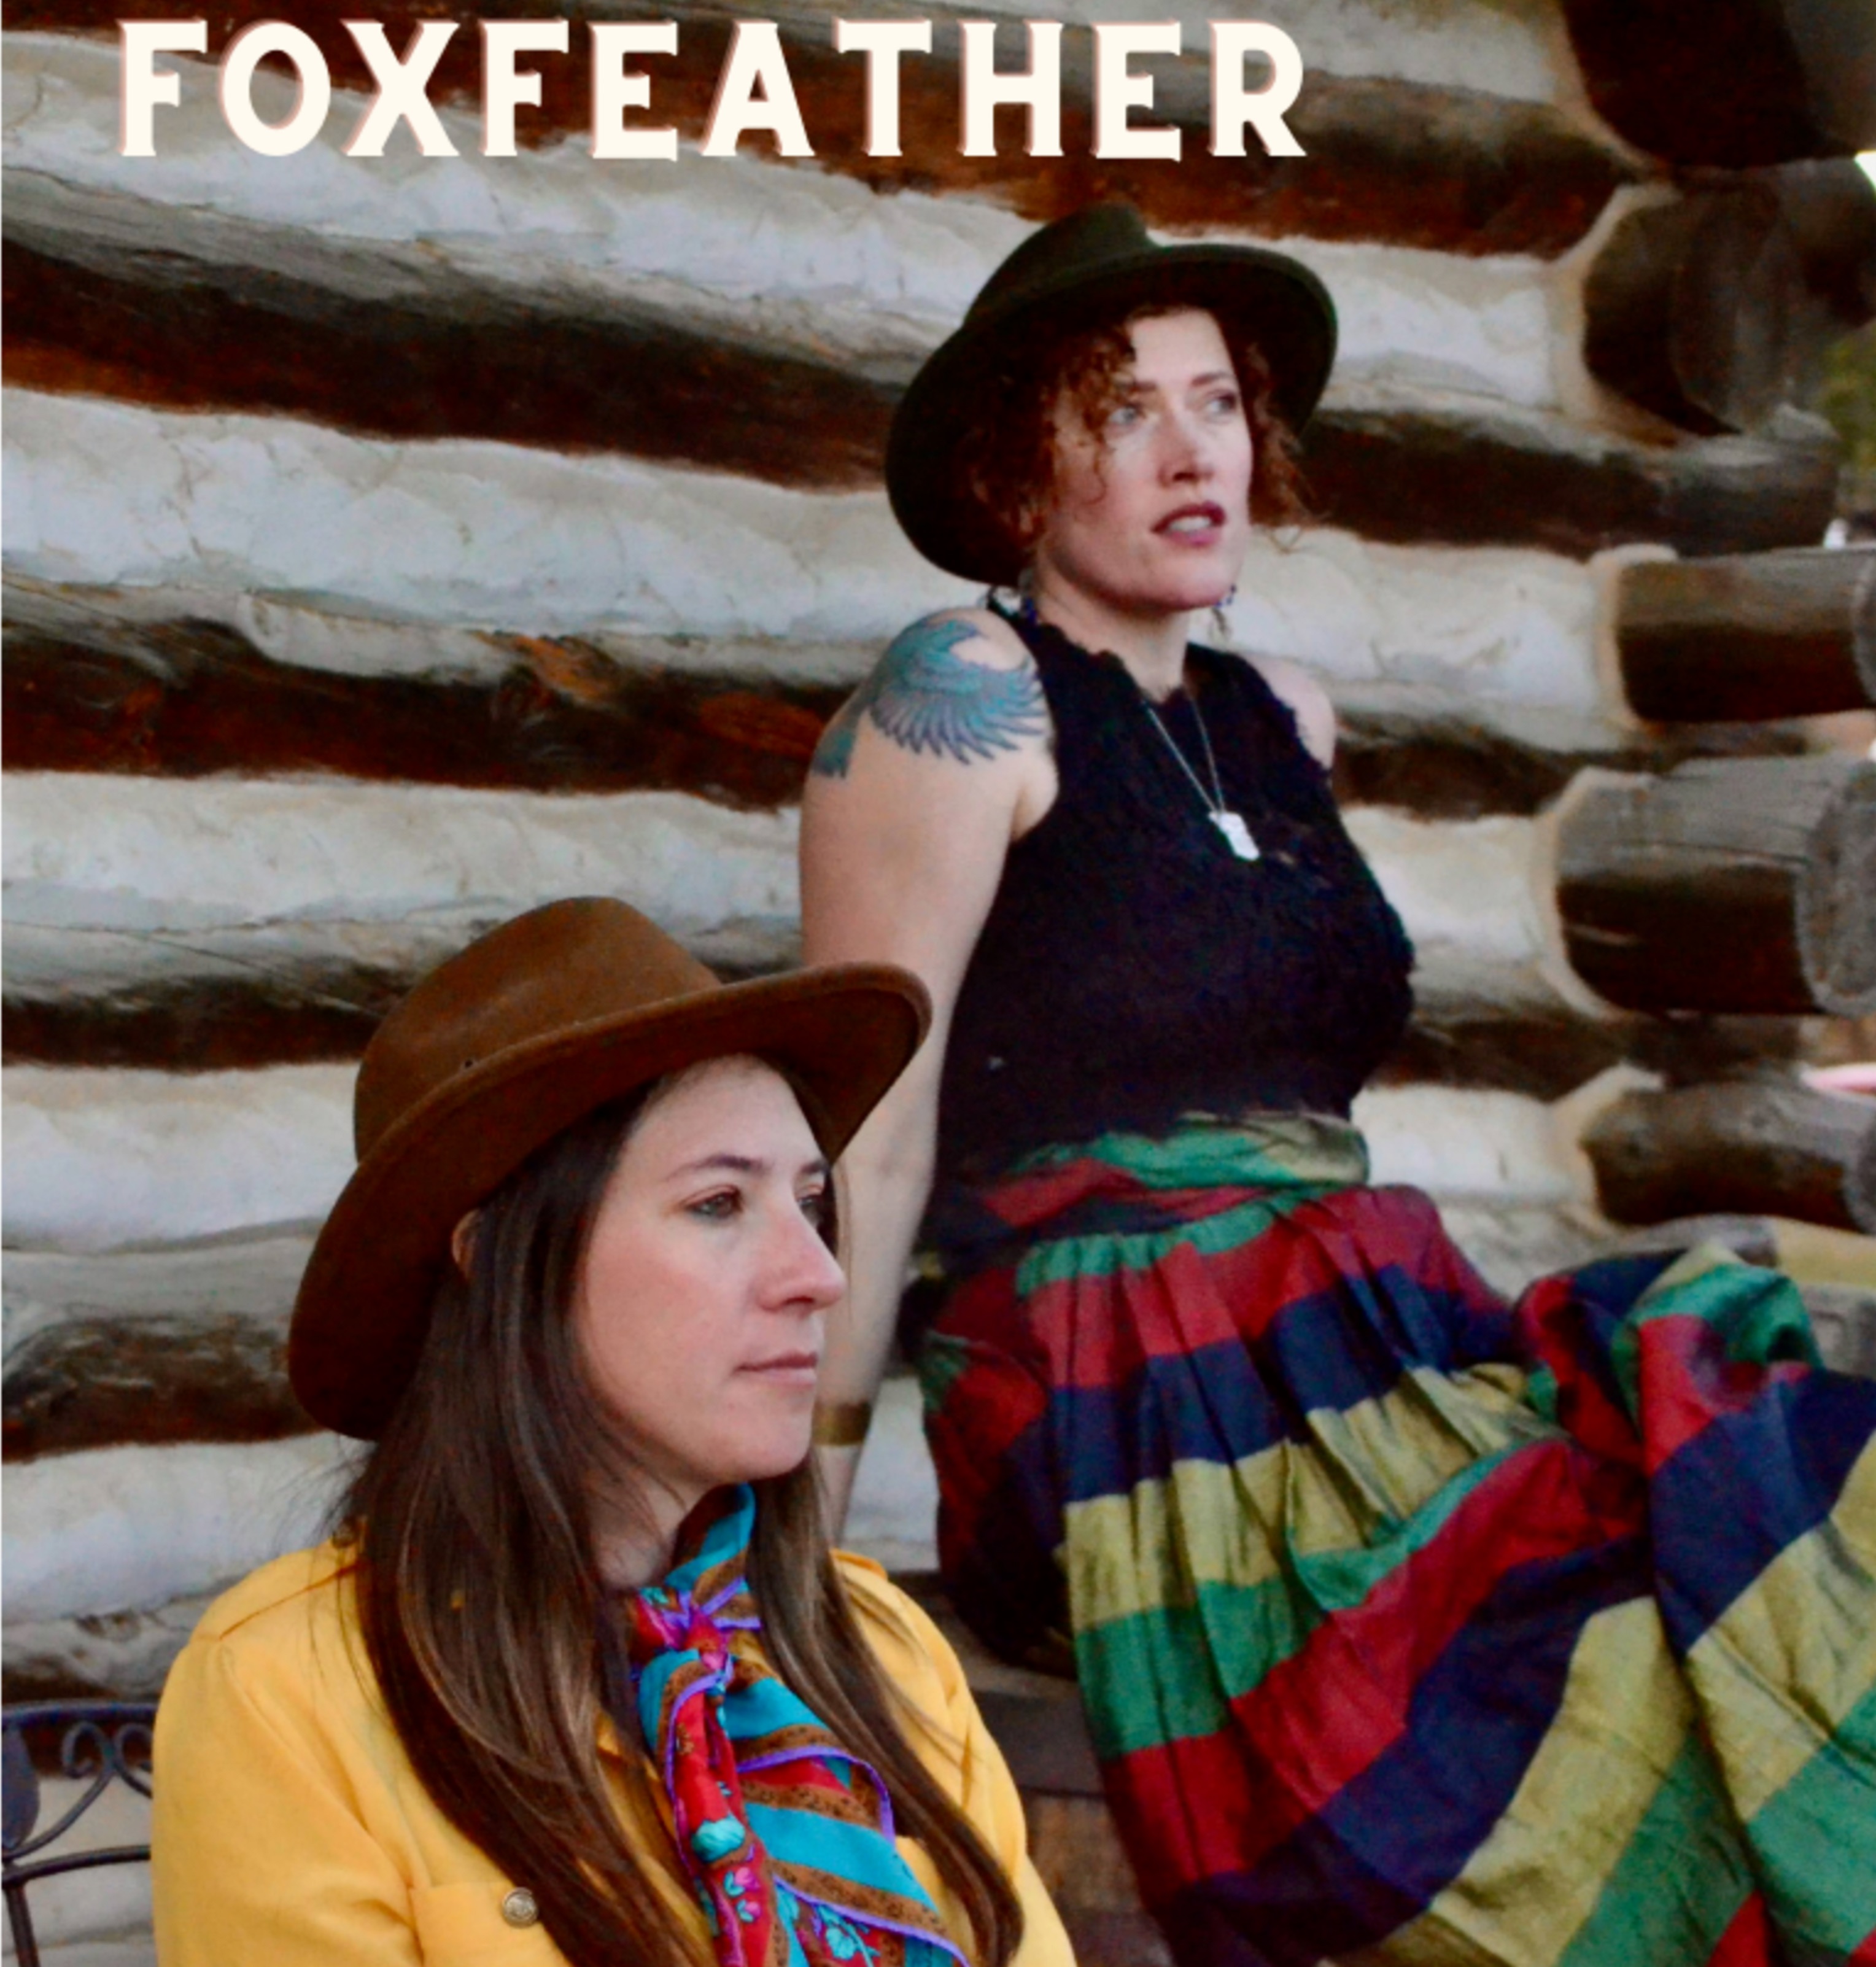 Foxfeather Delivers An Empowering Showcase Of Resilience On New Single “Too Damn Small”